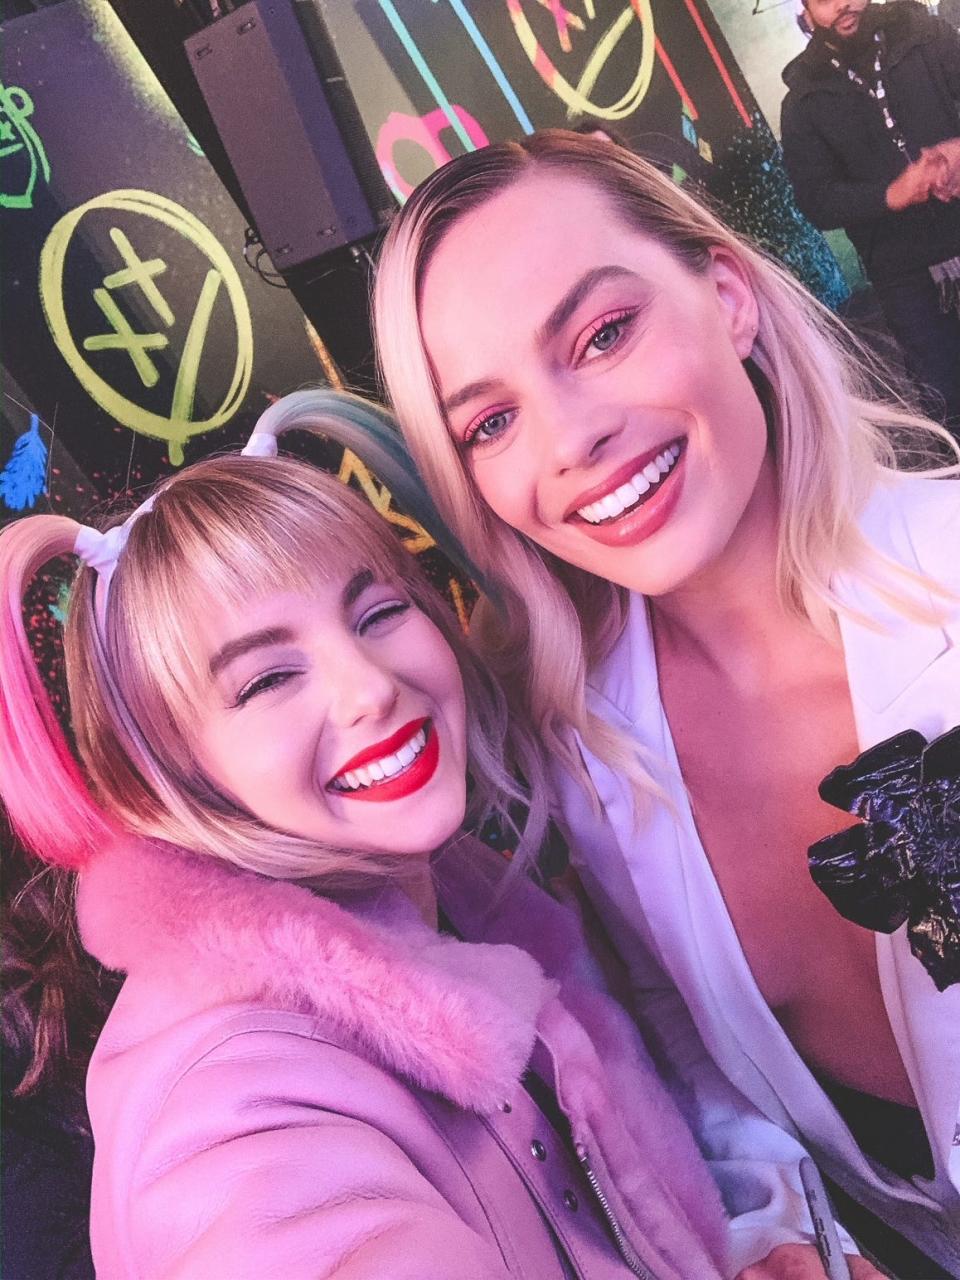 Springfield-based social media content creator Heidi Mae Herrington snaps a selfie with actress Margot Robbie at a "Suicide Squad" film premiere.